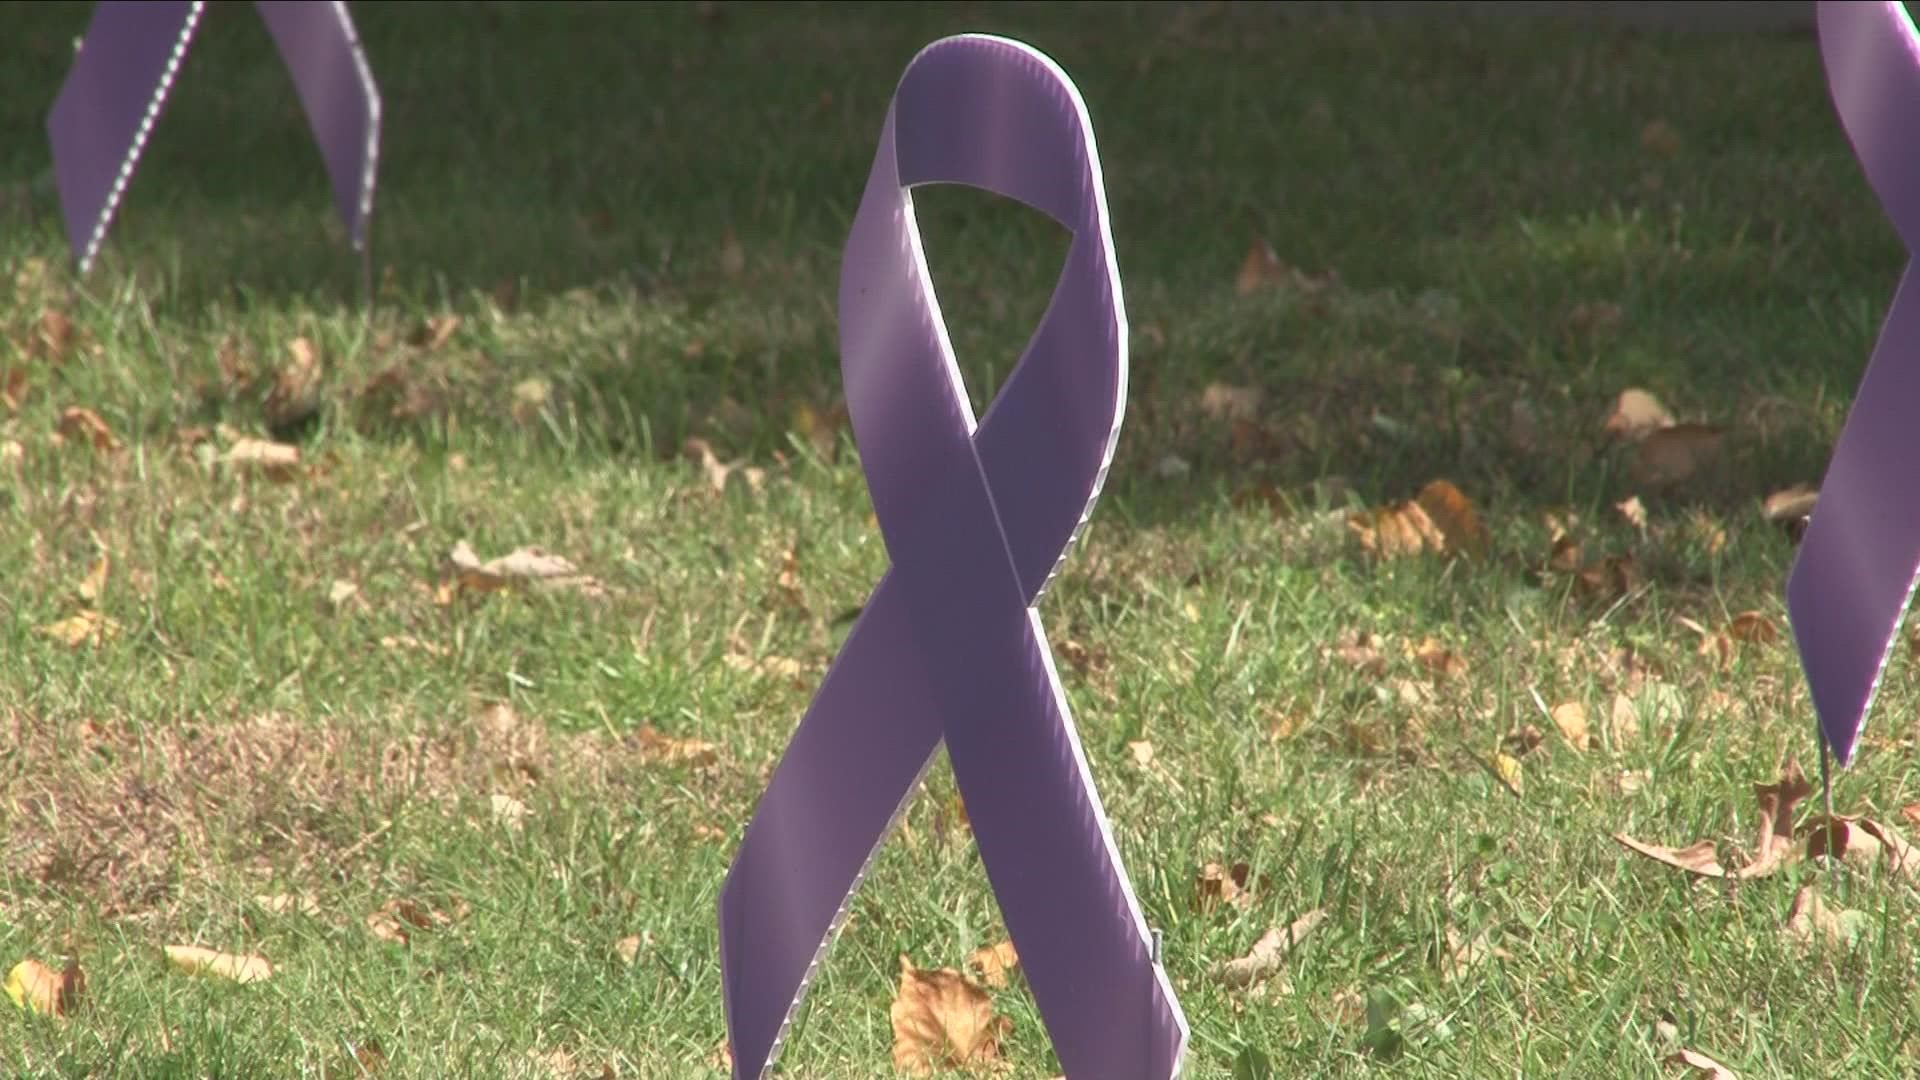 Domestic Violence awareness month